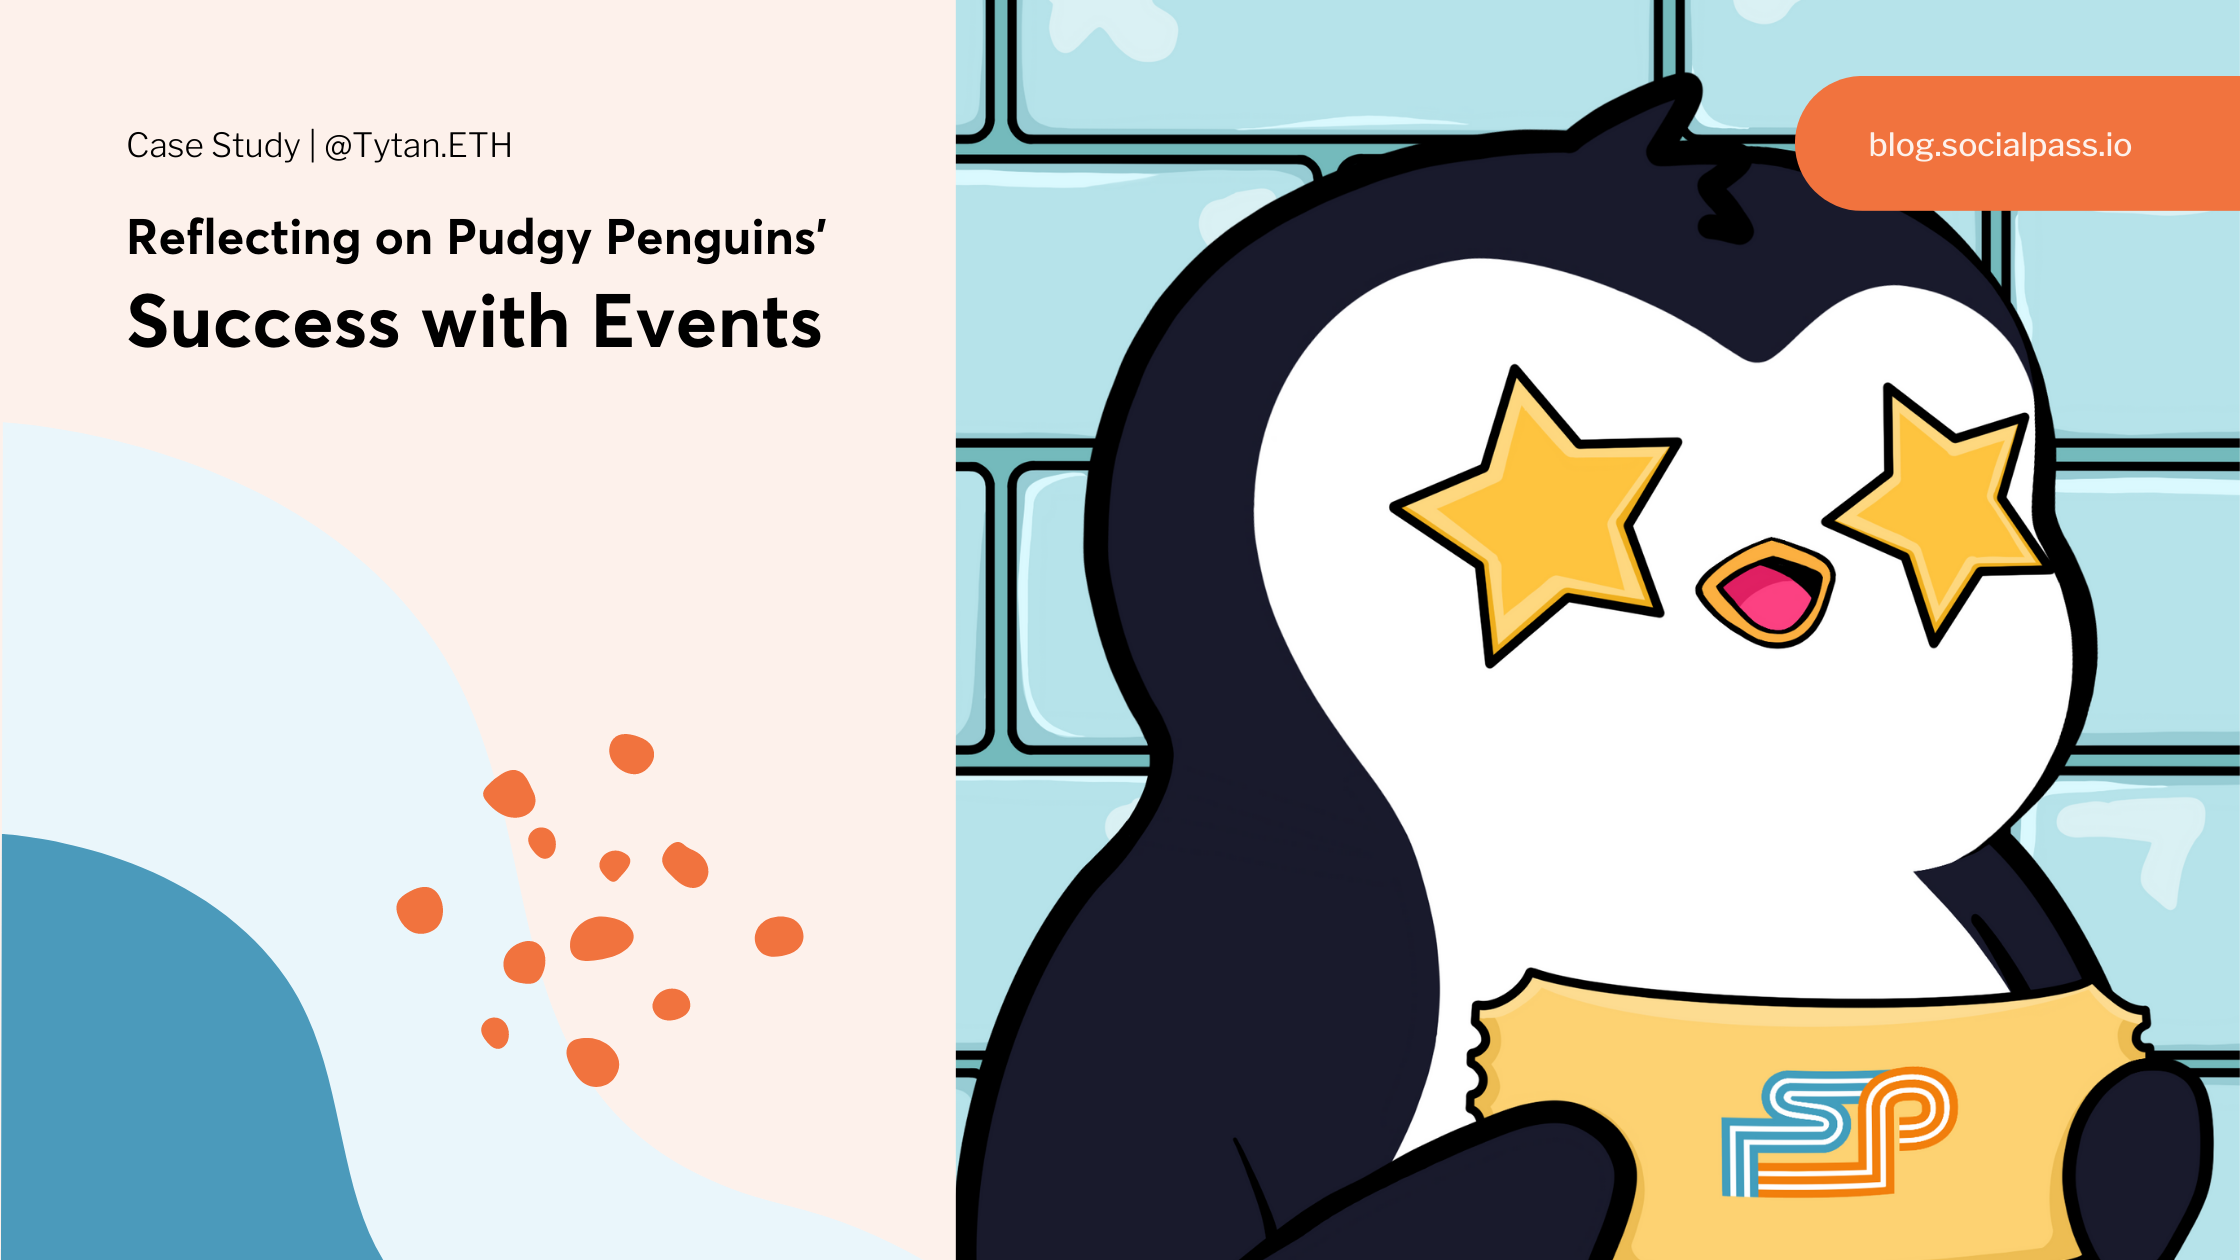 Reflecting on Pudgy Penguins' Success with Events